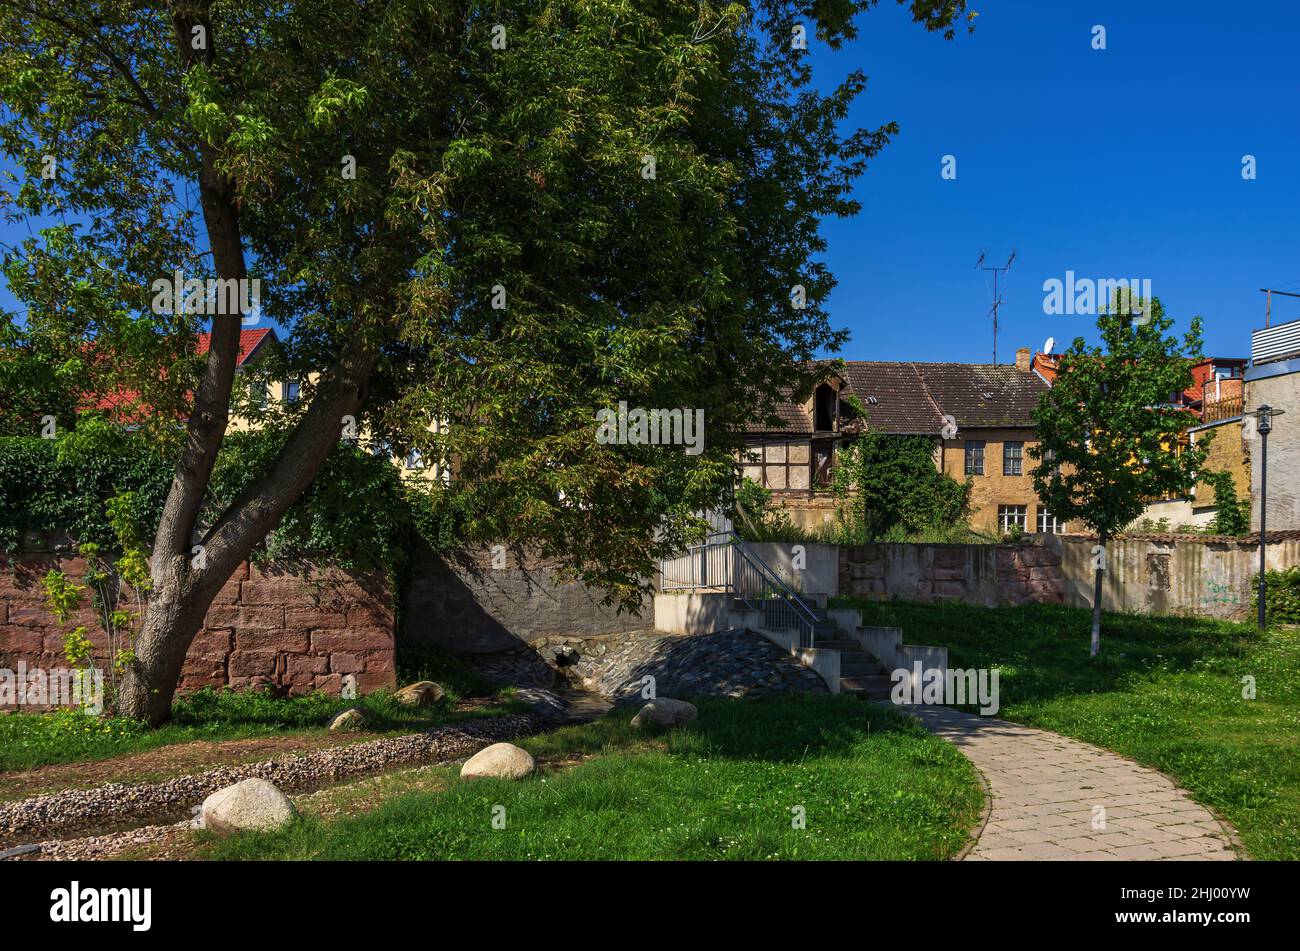 By the town wall, Bad Frankenhausen, Thuringia, Kyffhäuser region, Germany. Stock Photo